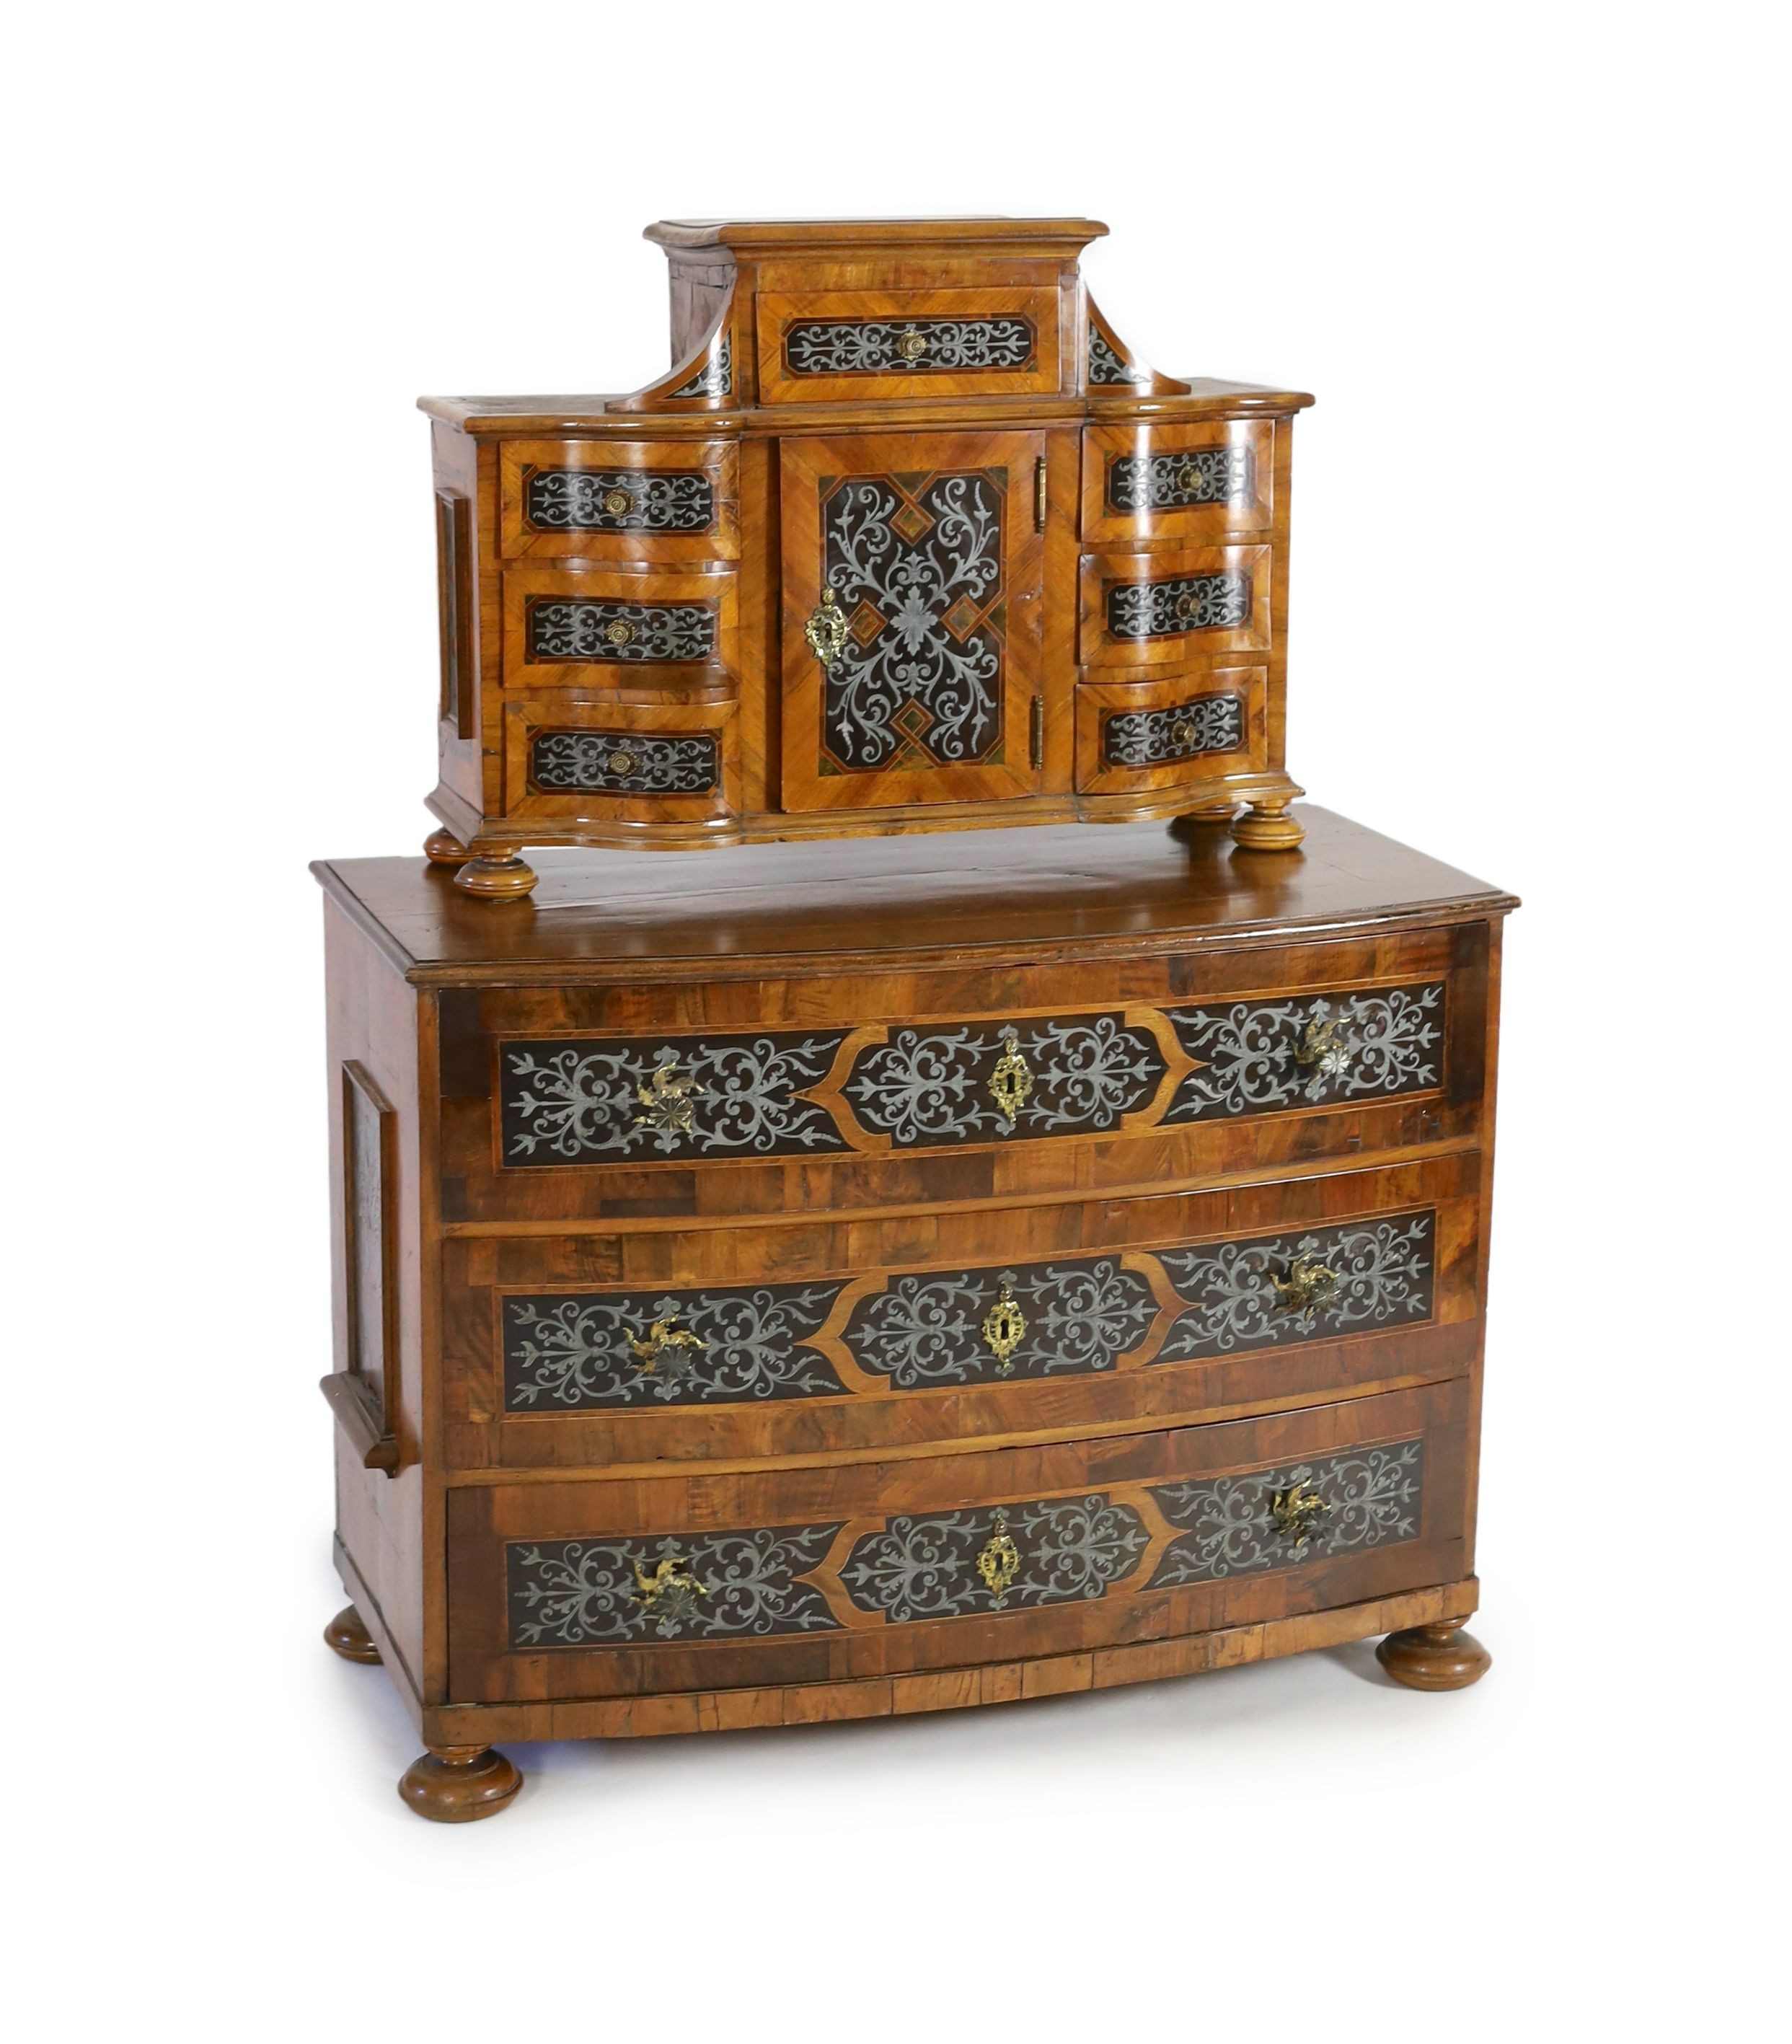 A South German walnut and cut pewter inlaid commode and matching tabernacle, second quarter 18th century, W.113cm D.57cm H.150cm